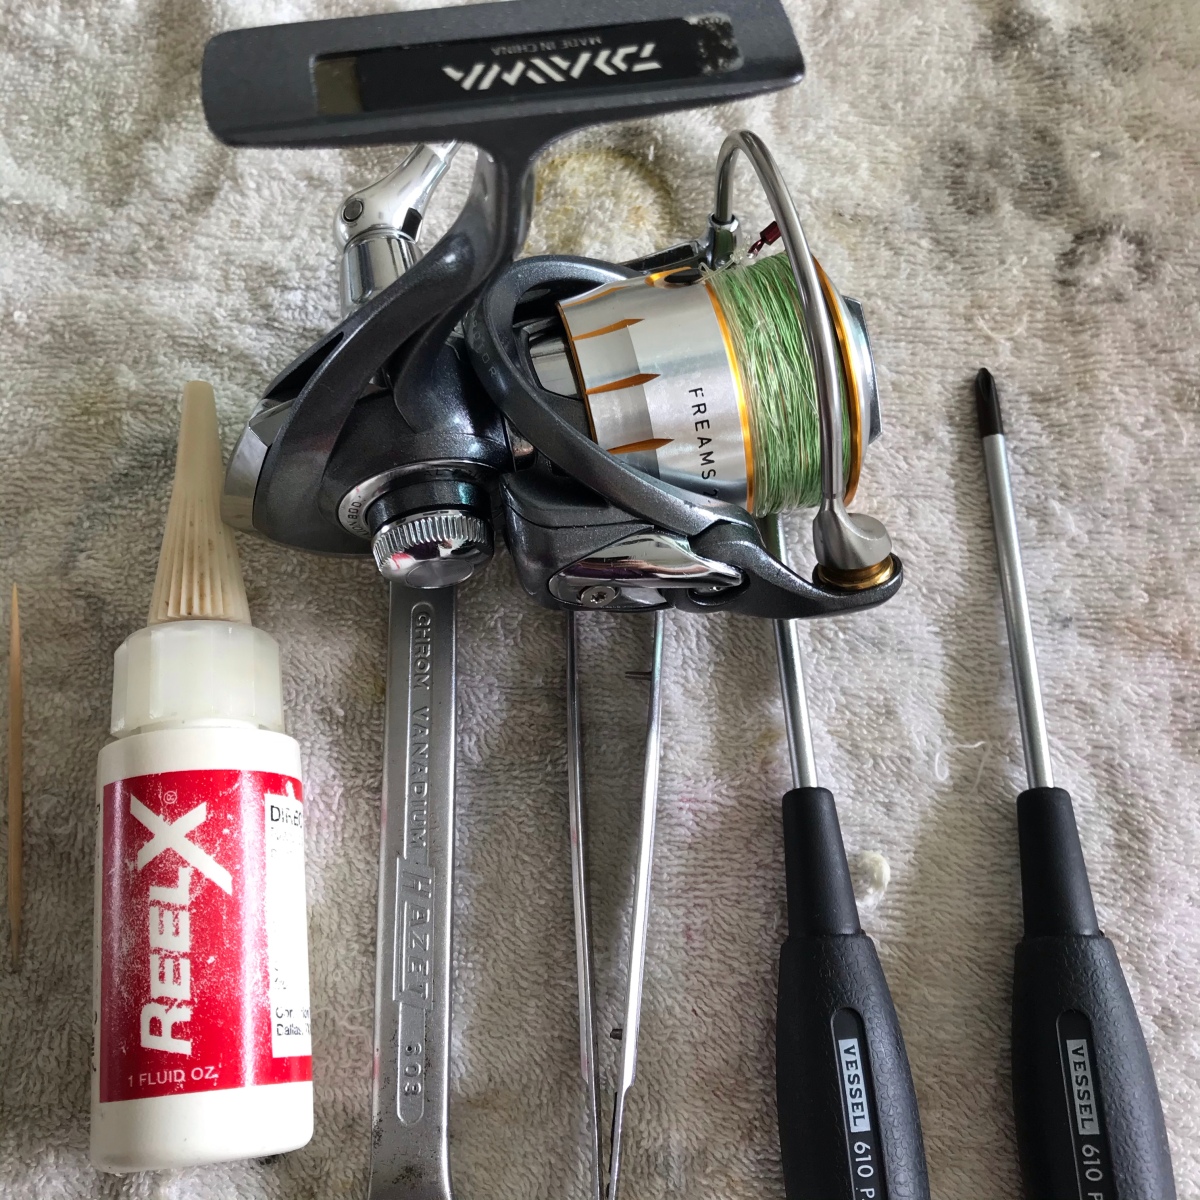 Simple Daiwa Spinning Reel Maintenance while you sit out Covid-19 at home